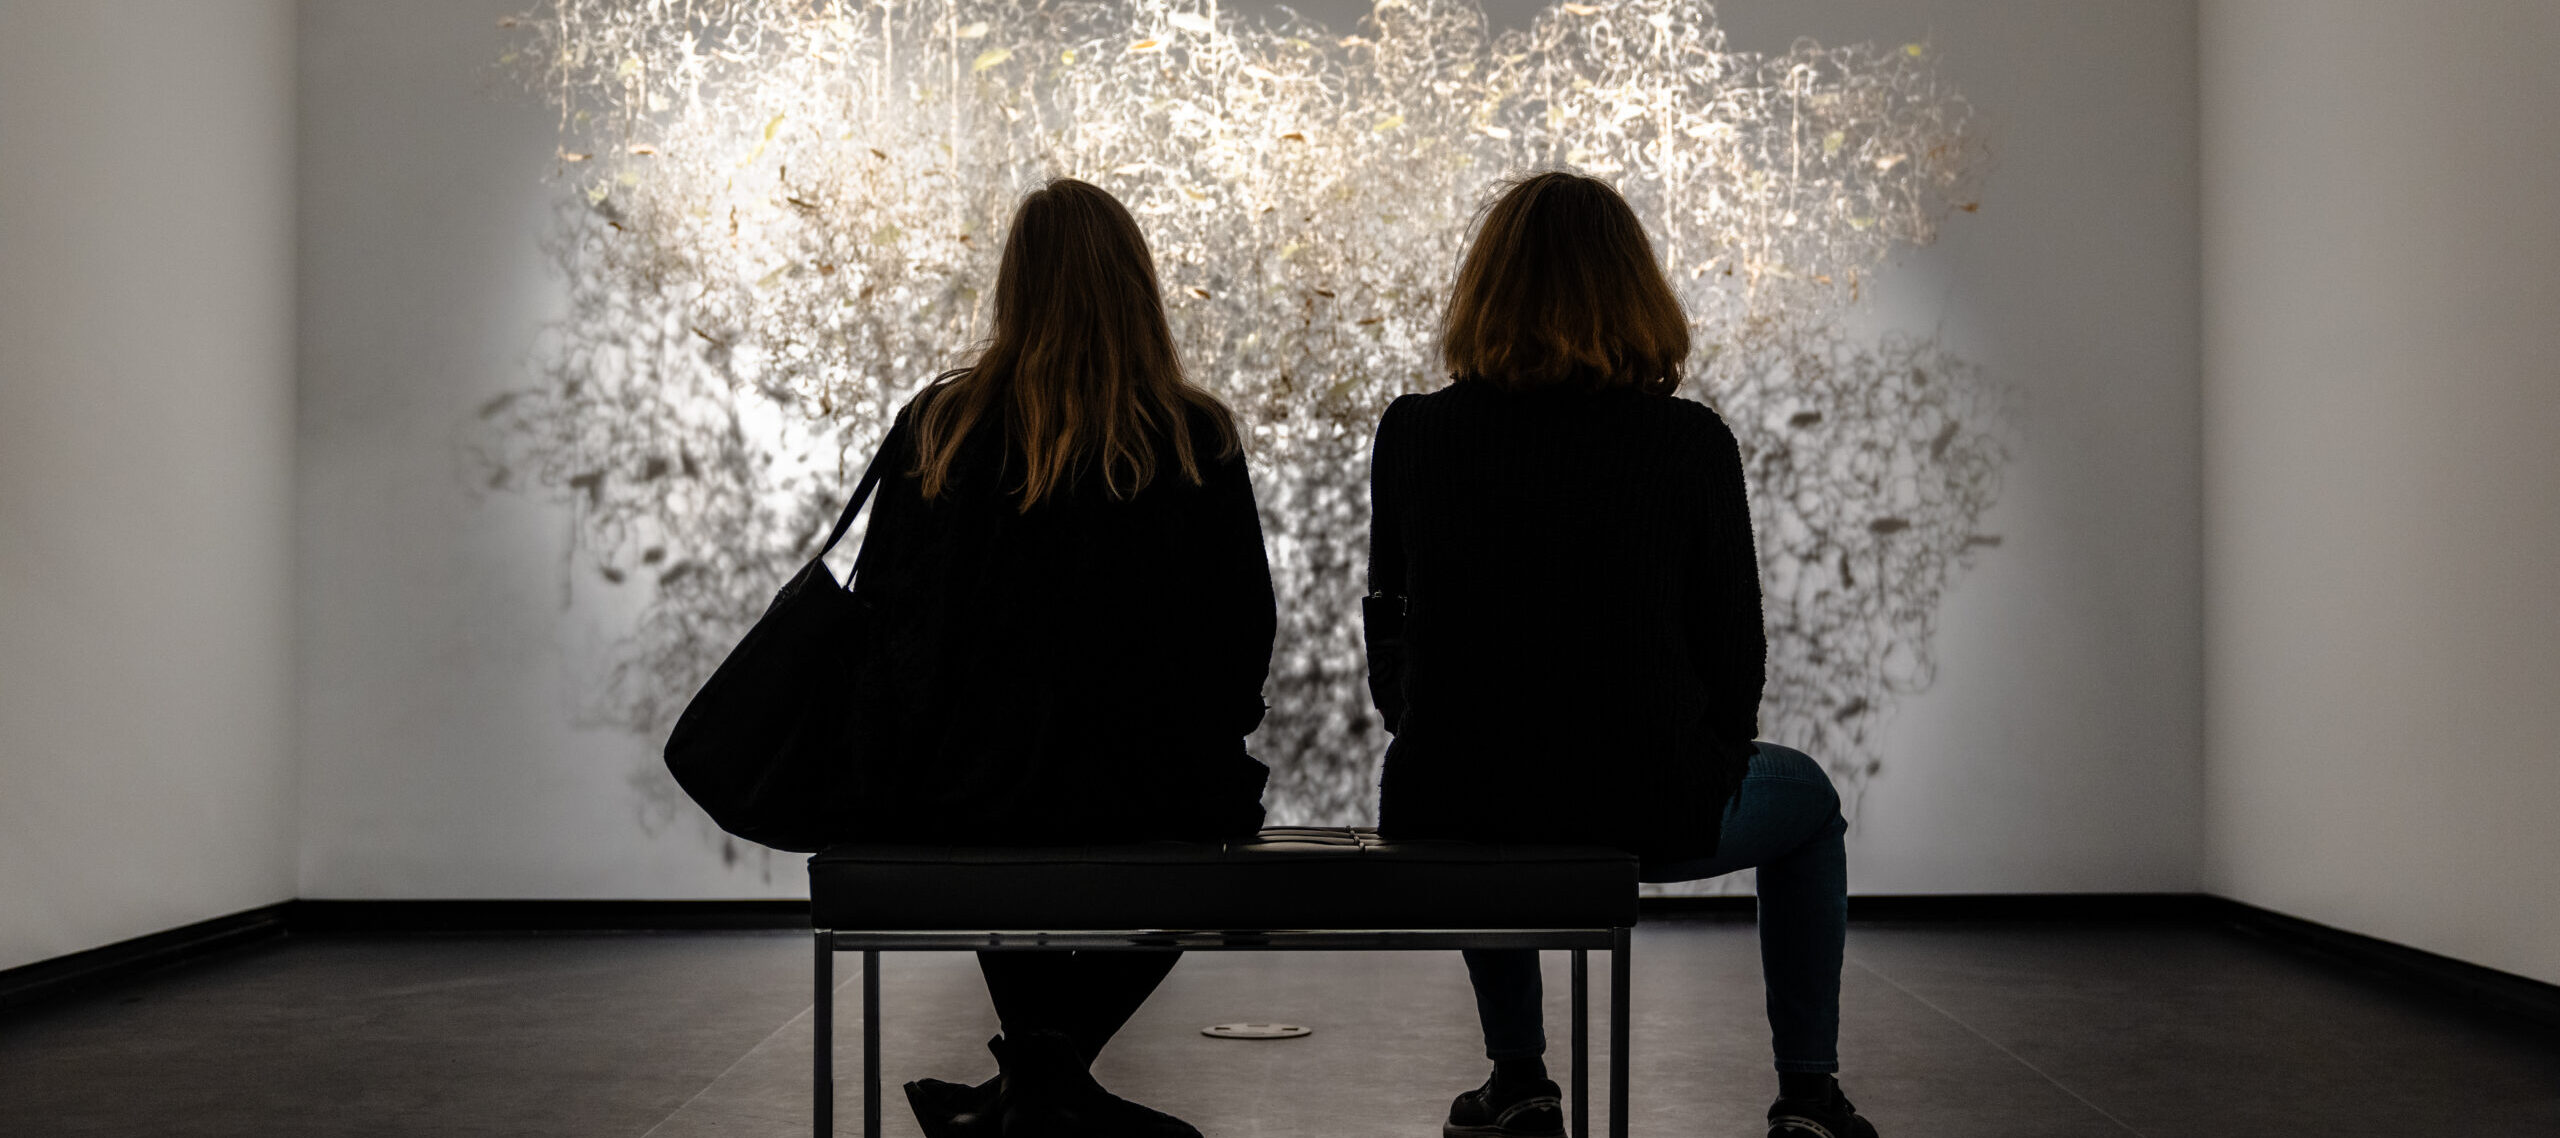 Two museum visitors sit on a bench and observe a brightly lit artwork in a modern gallery.